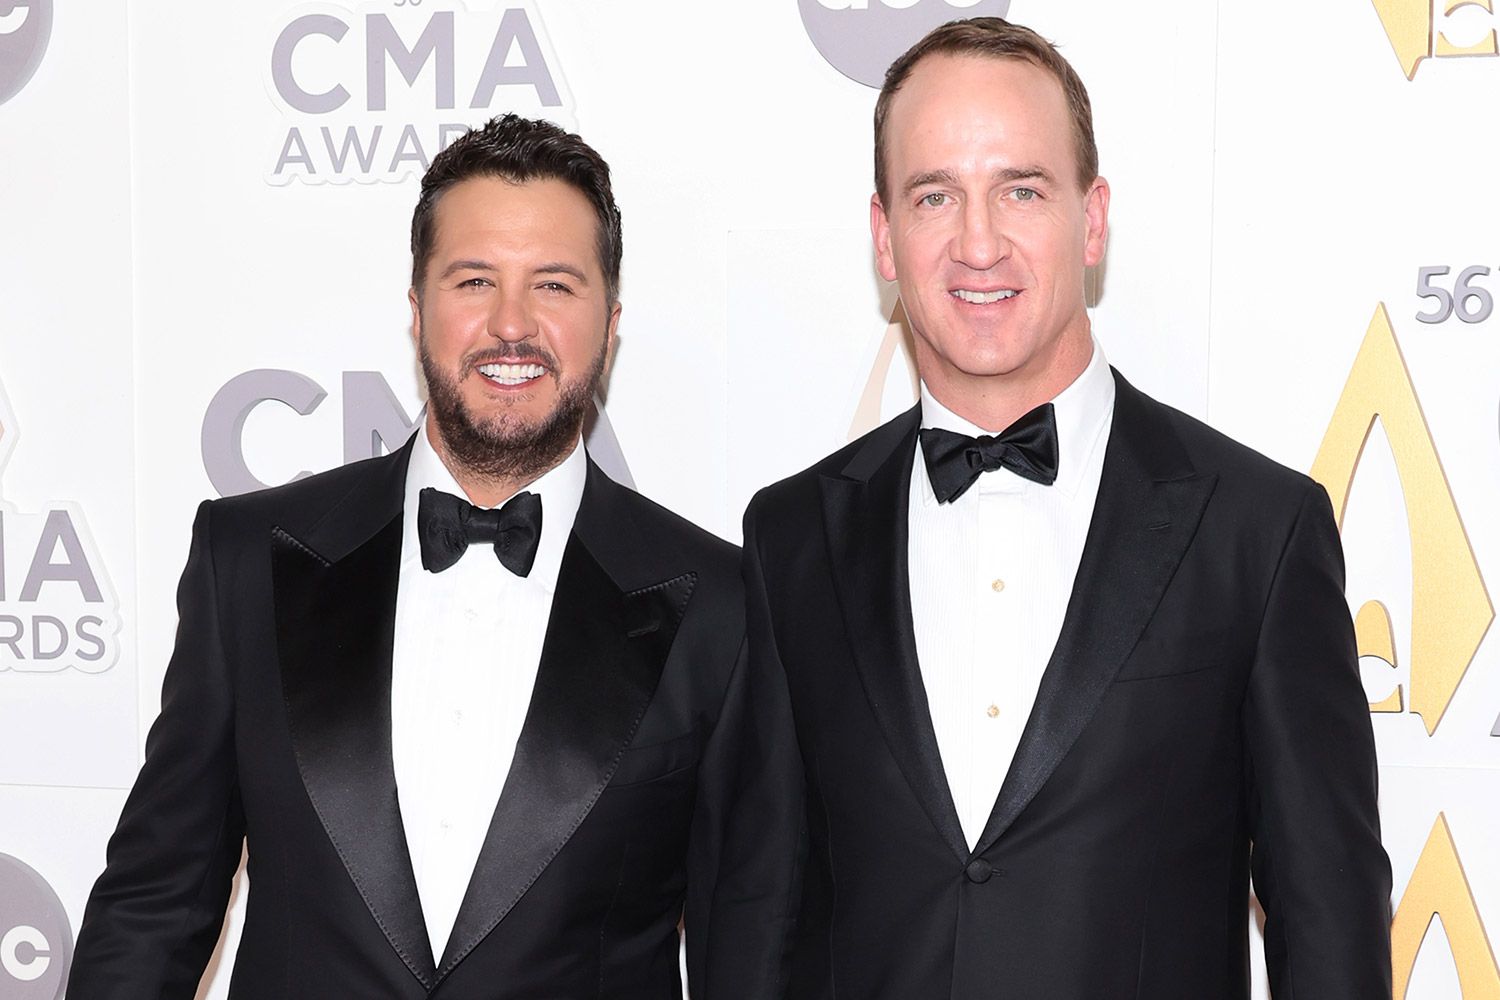 Luke Bryan and Peyton Manning attend The 56th Annual CMA Awards at Bridgestone Arena on November 09, 2022 in Nashville, Tennessee